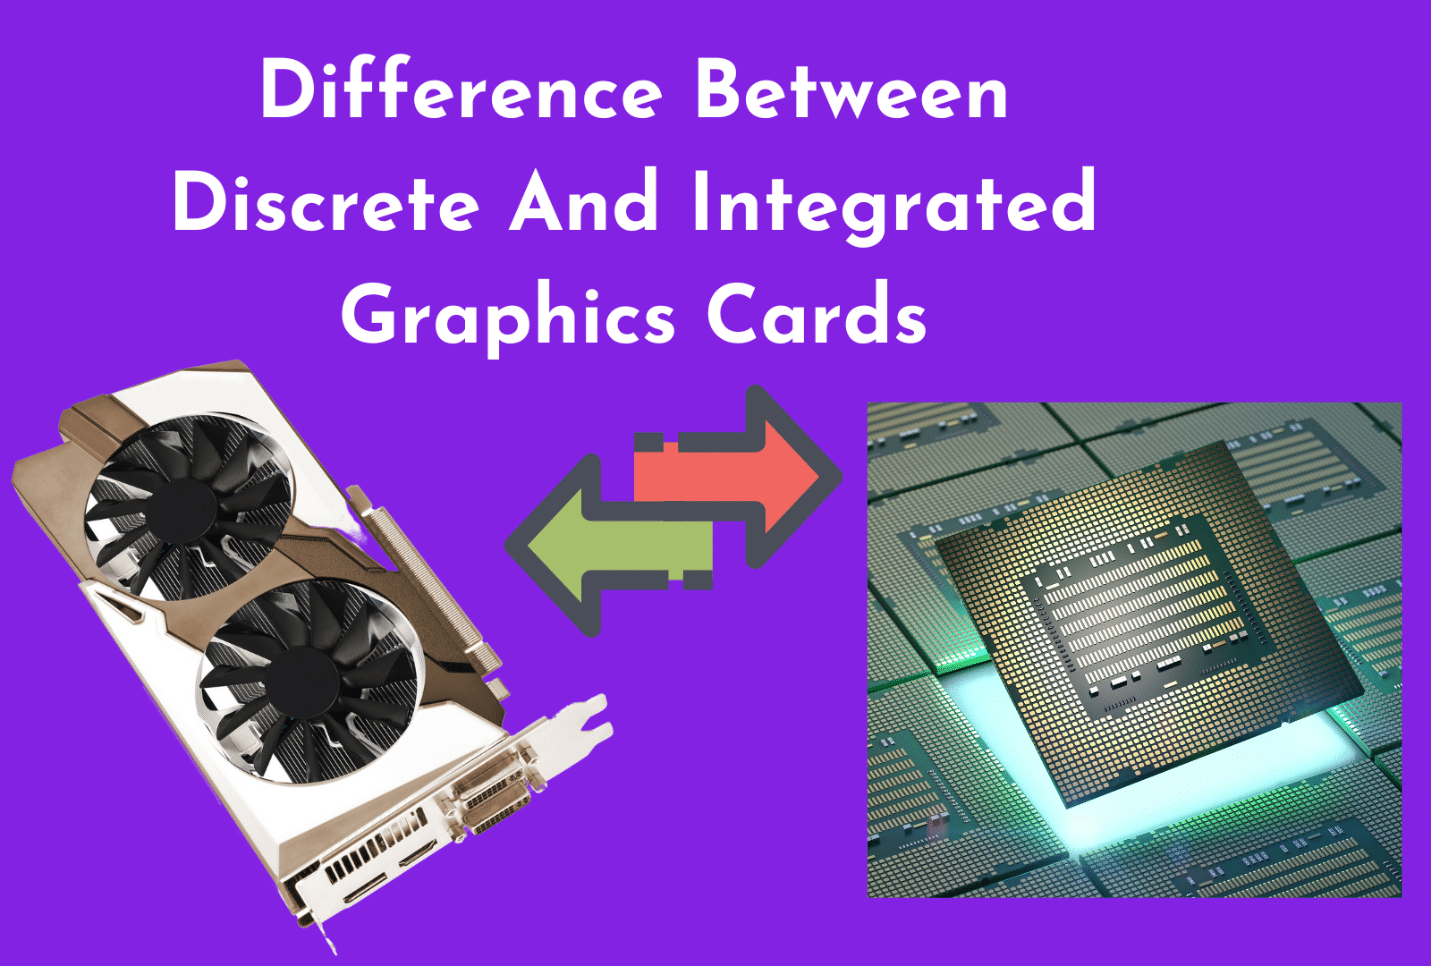 C:\Users\Mohsin\Downloads\The Difference Between Discrete And Integrated Graphics Cards.png